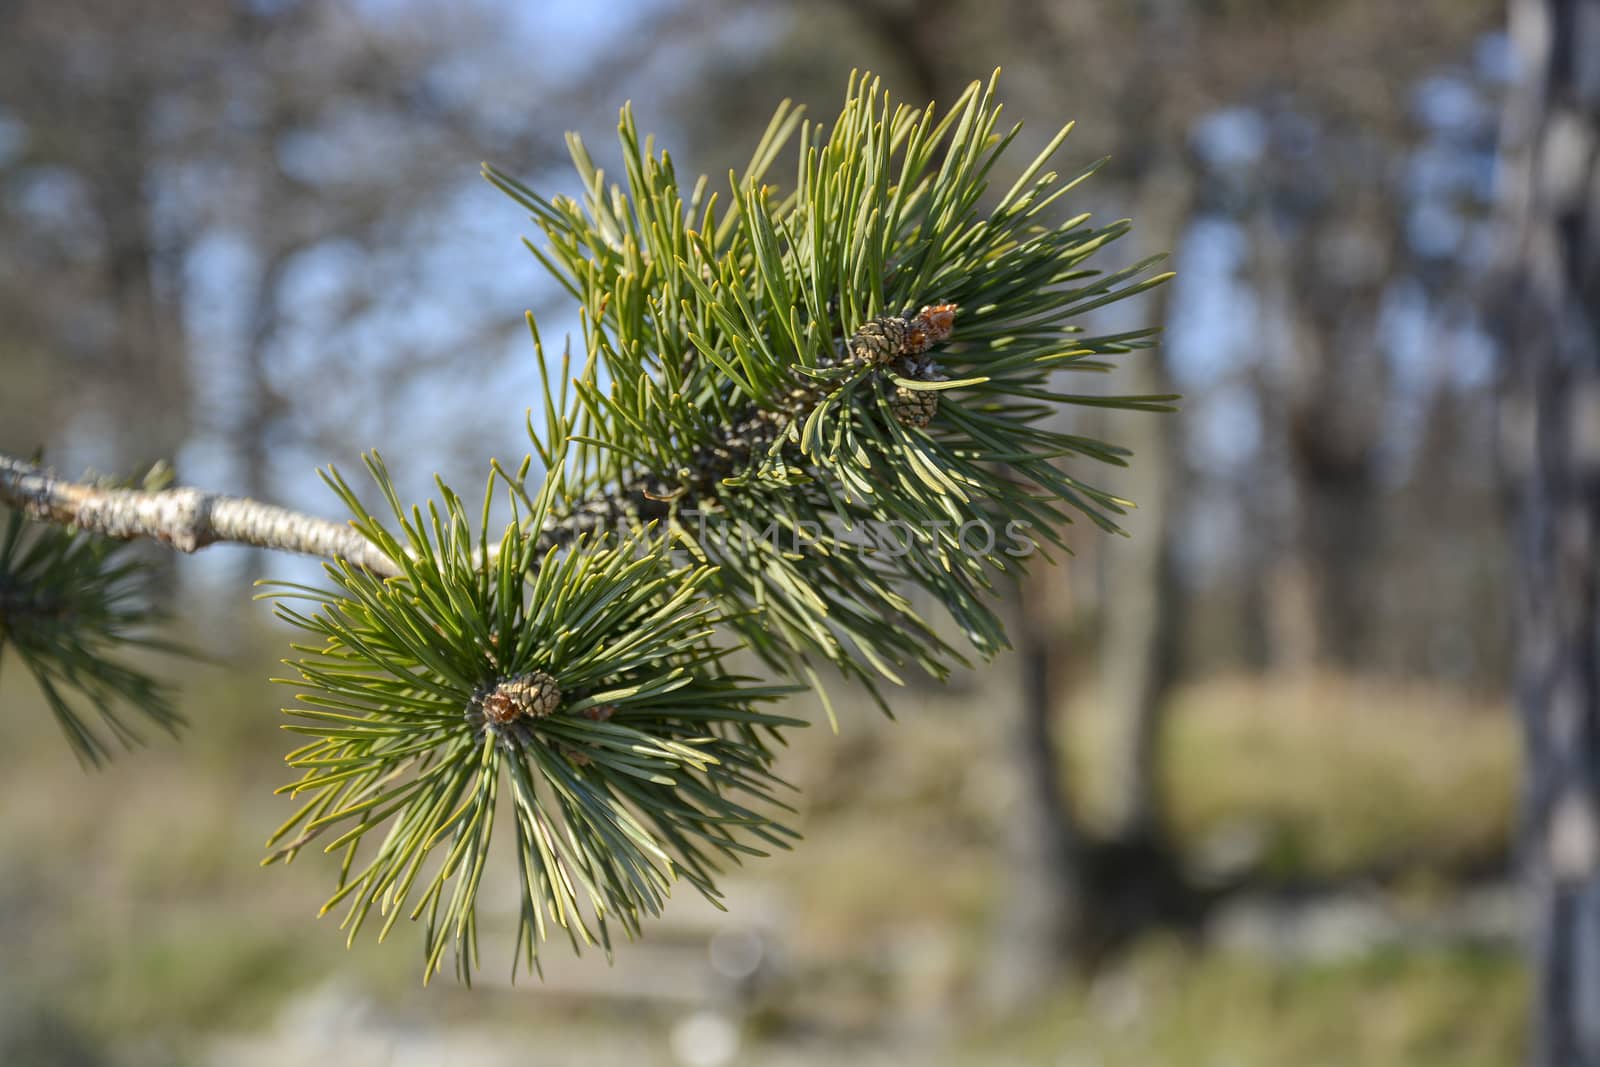 Fresh new green pine branches closeup in spring sunlight, April in Sweden.